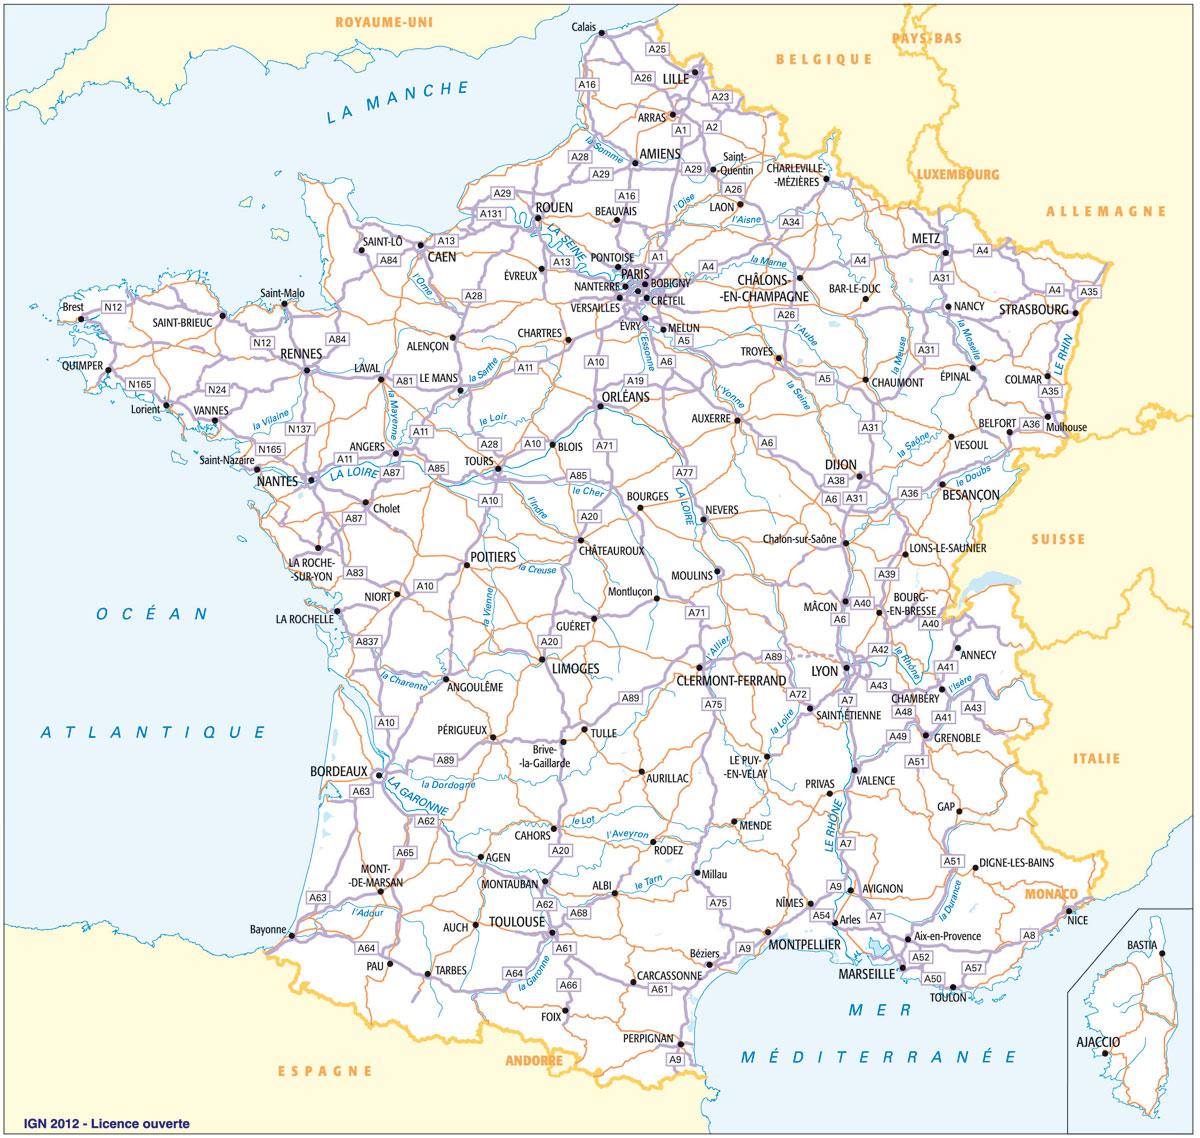 Road map of France roads, tolls and highways of France